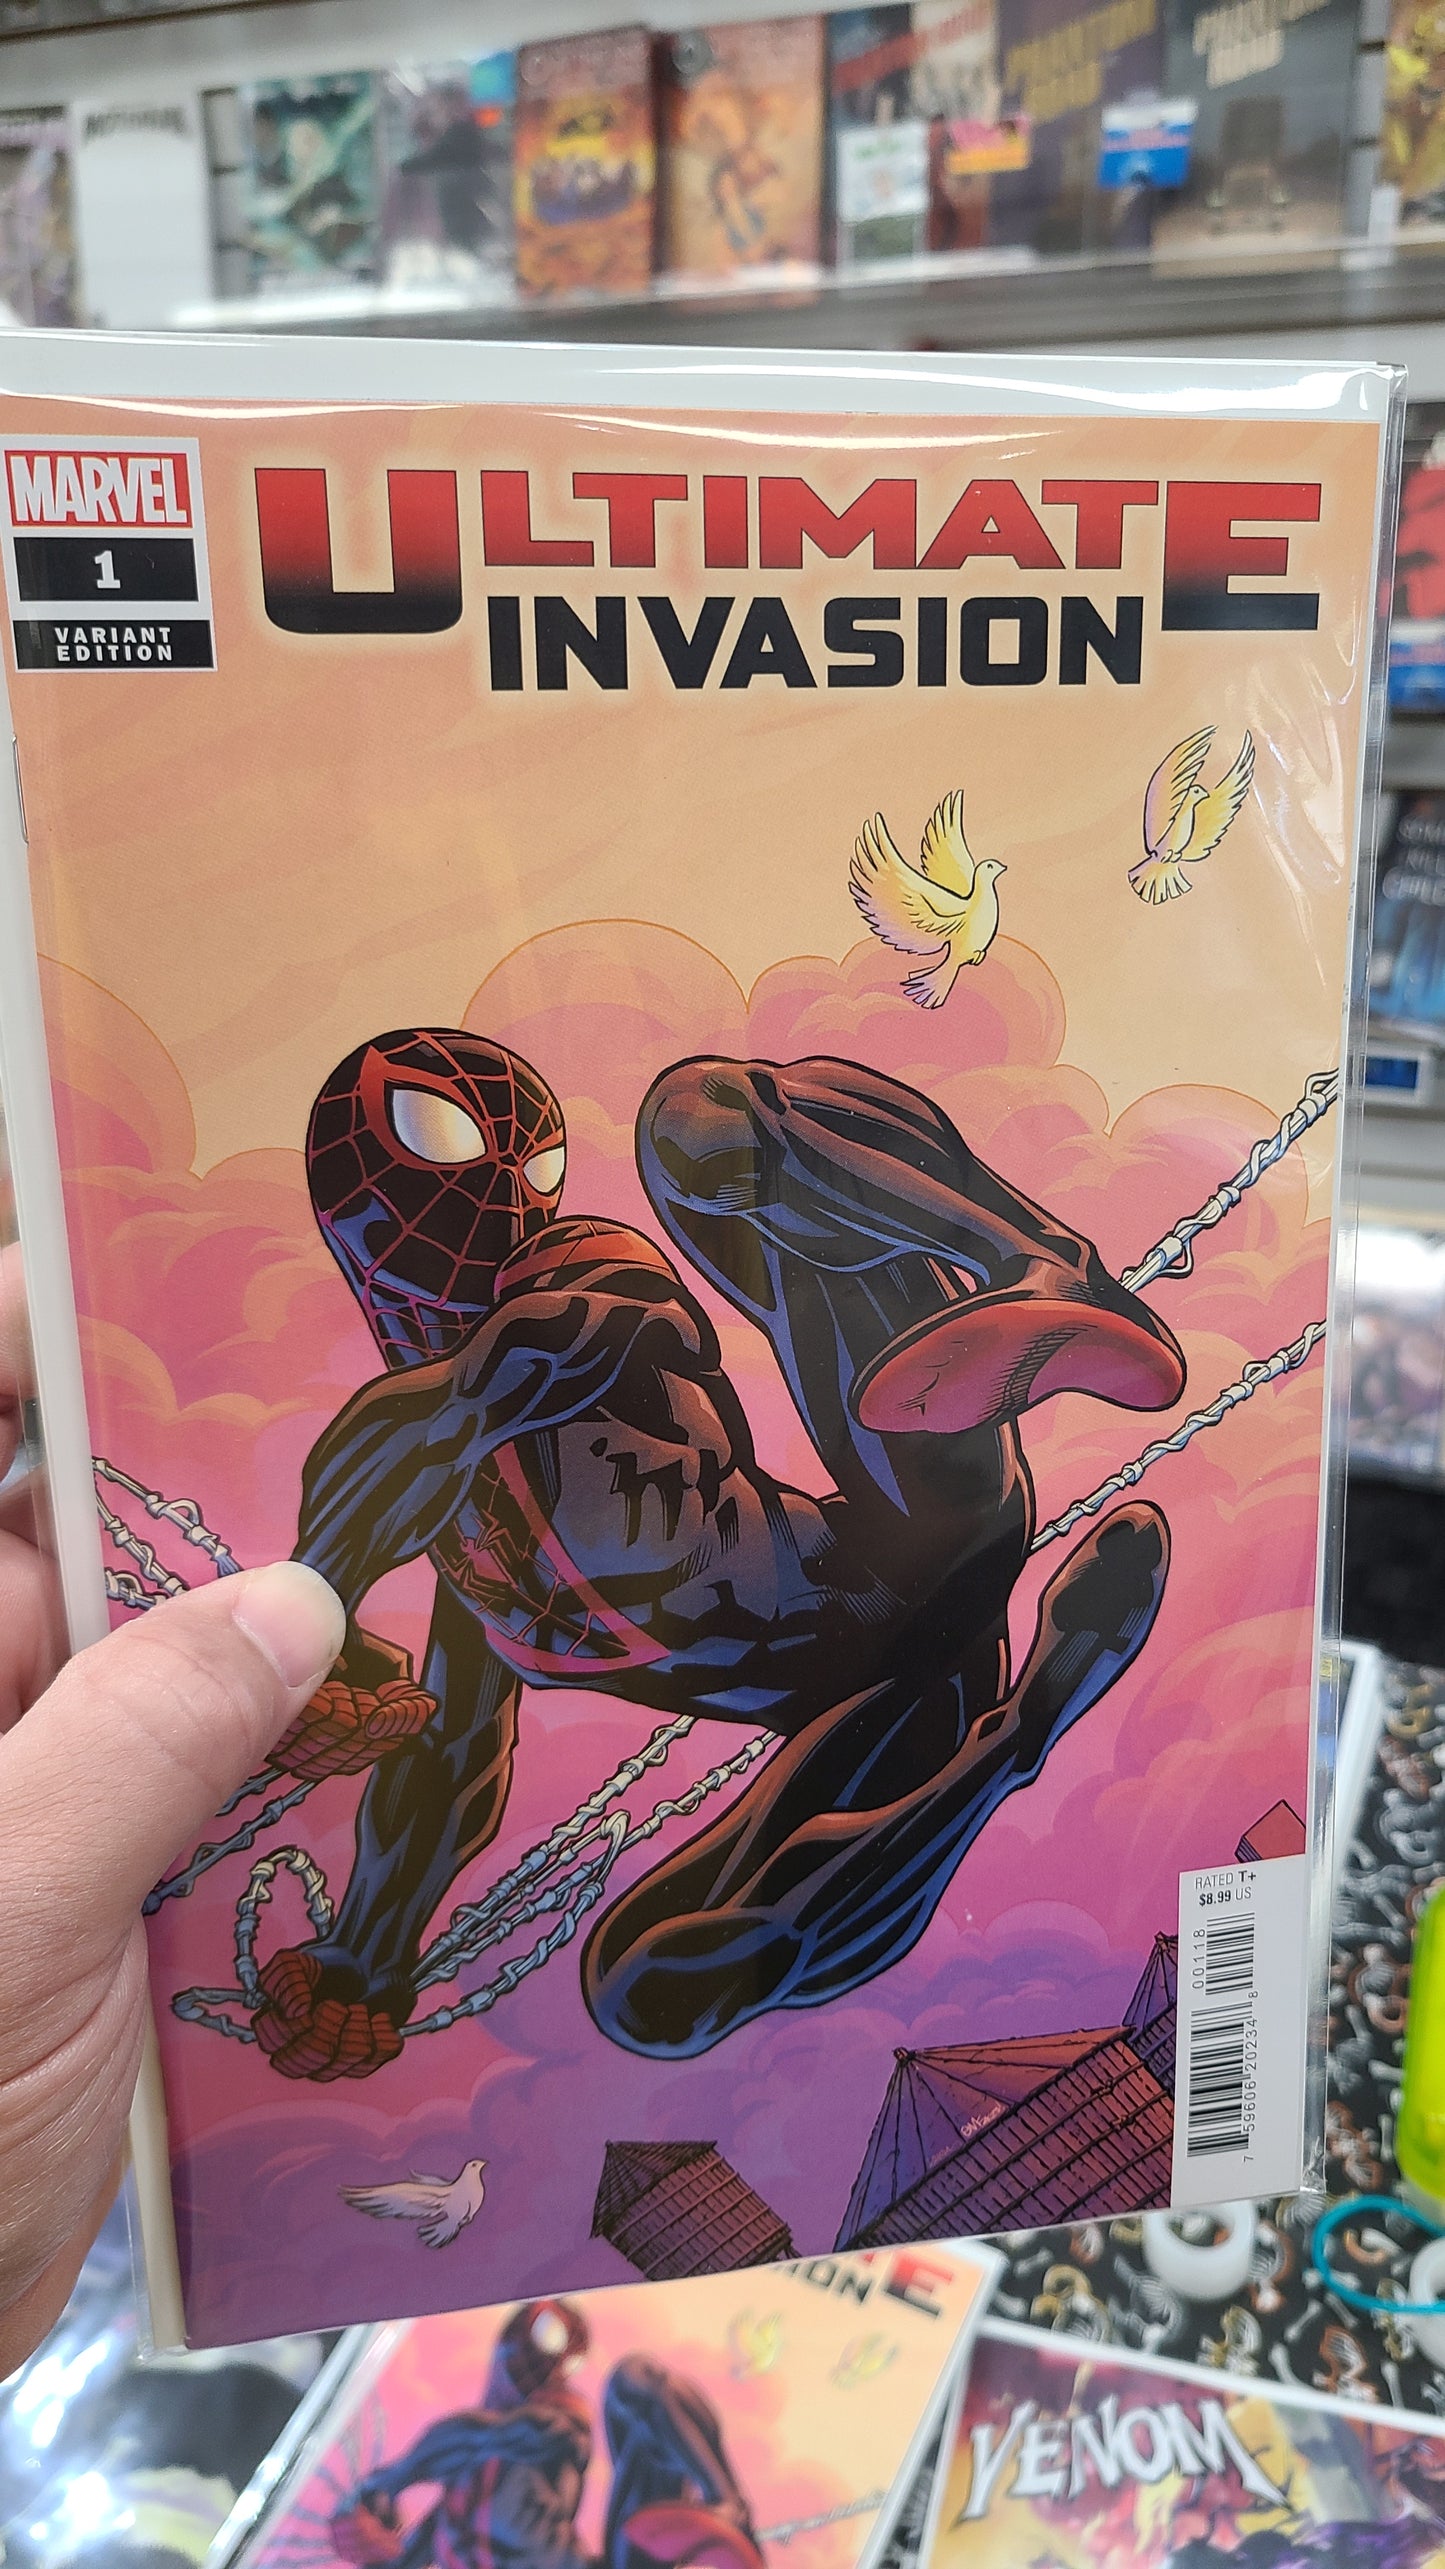 ULTIMATE INVASION #1 1:25 BY ED MCGUINNESS